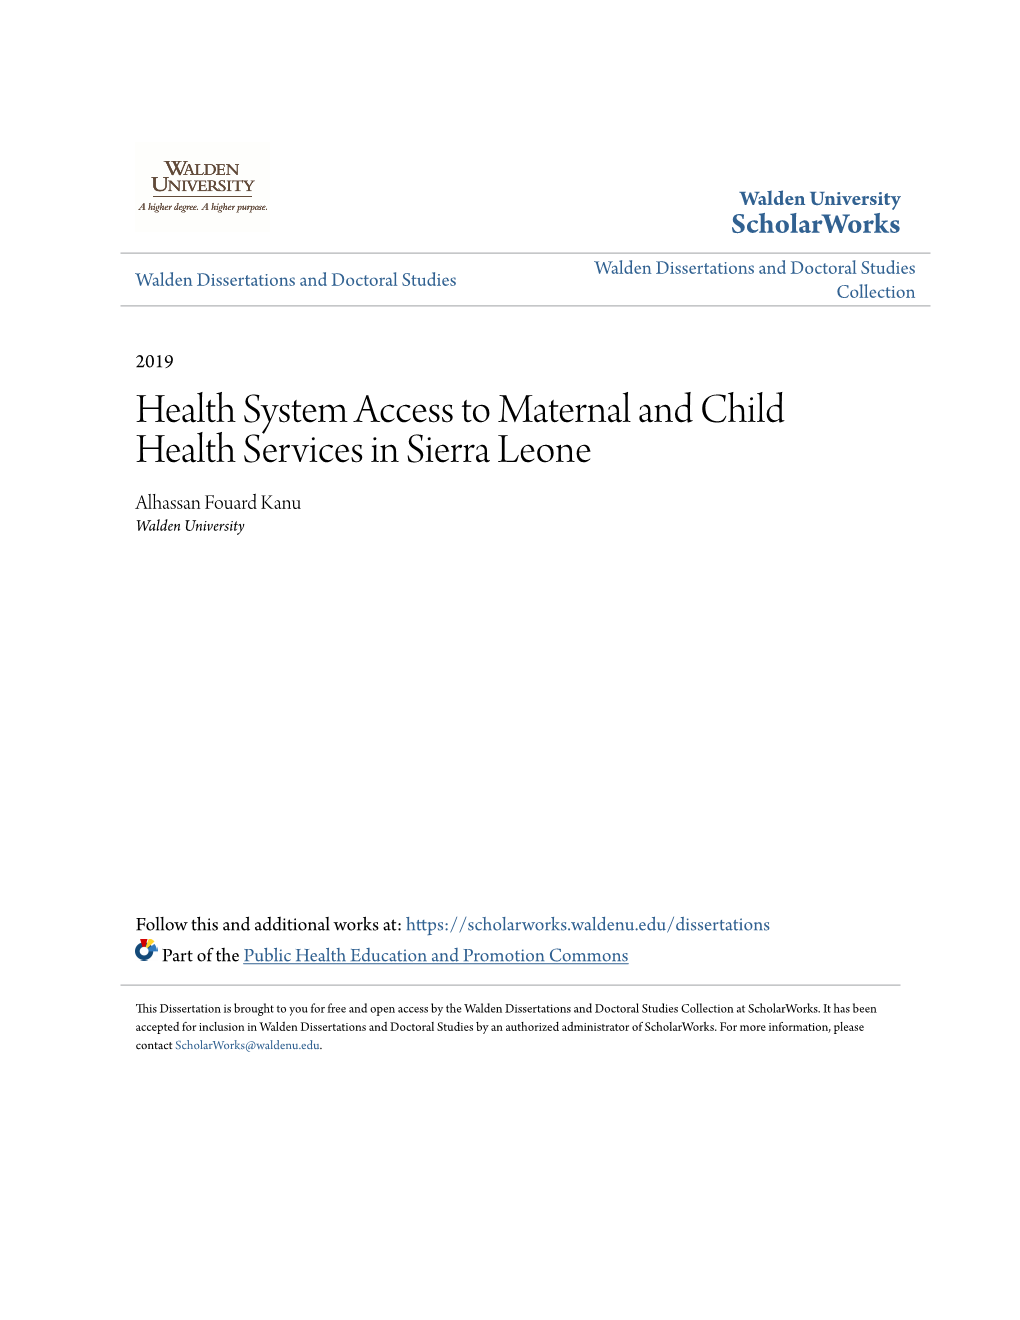 Health System Access to Maternal and Child Health Services in Sierra Leone Alhassan Fouard Kanu Walden University